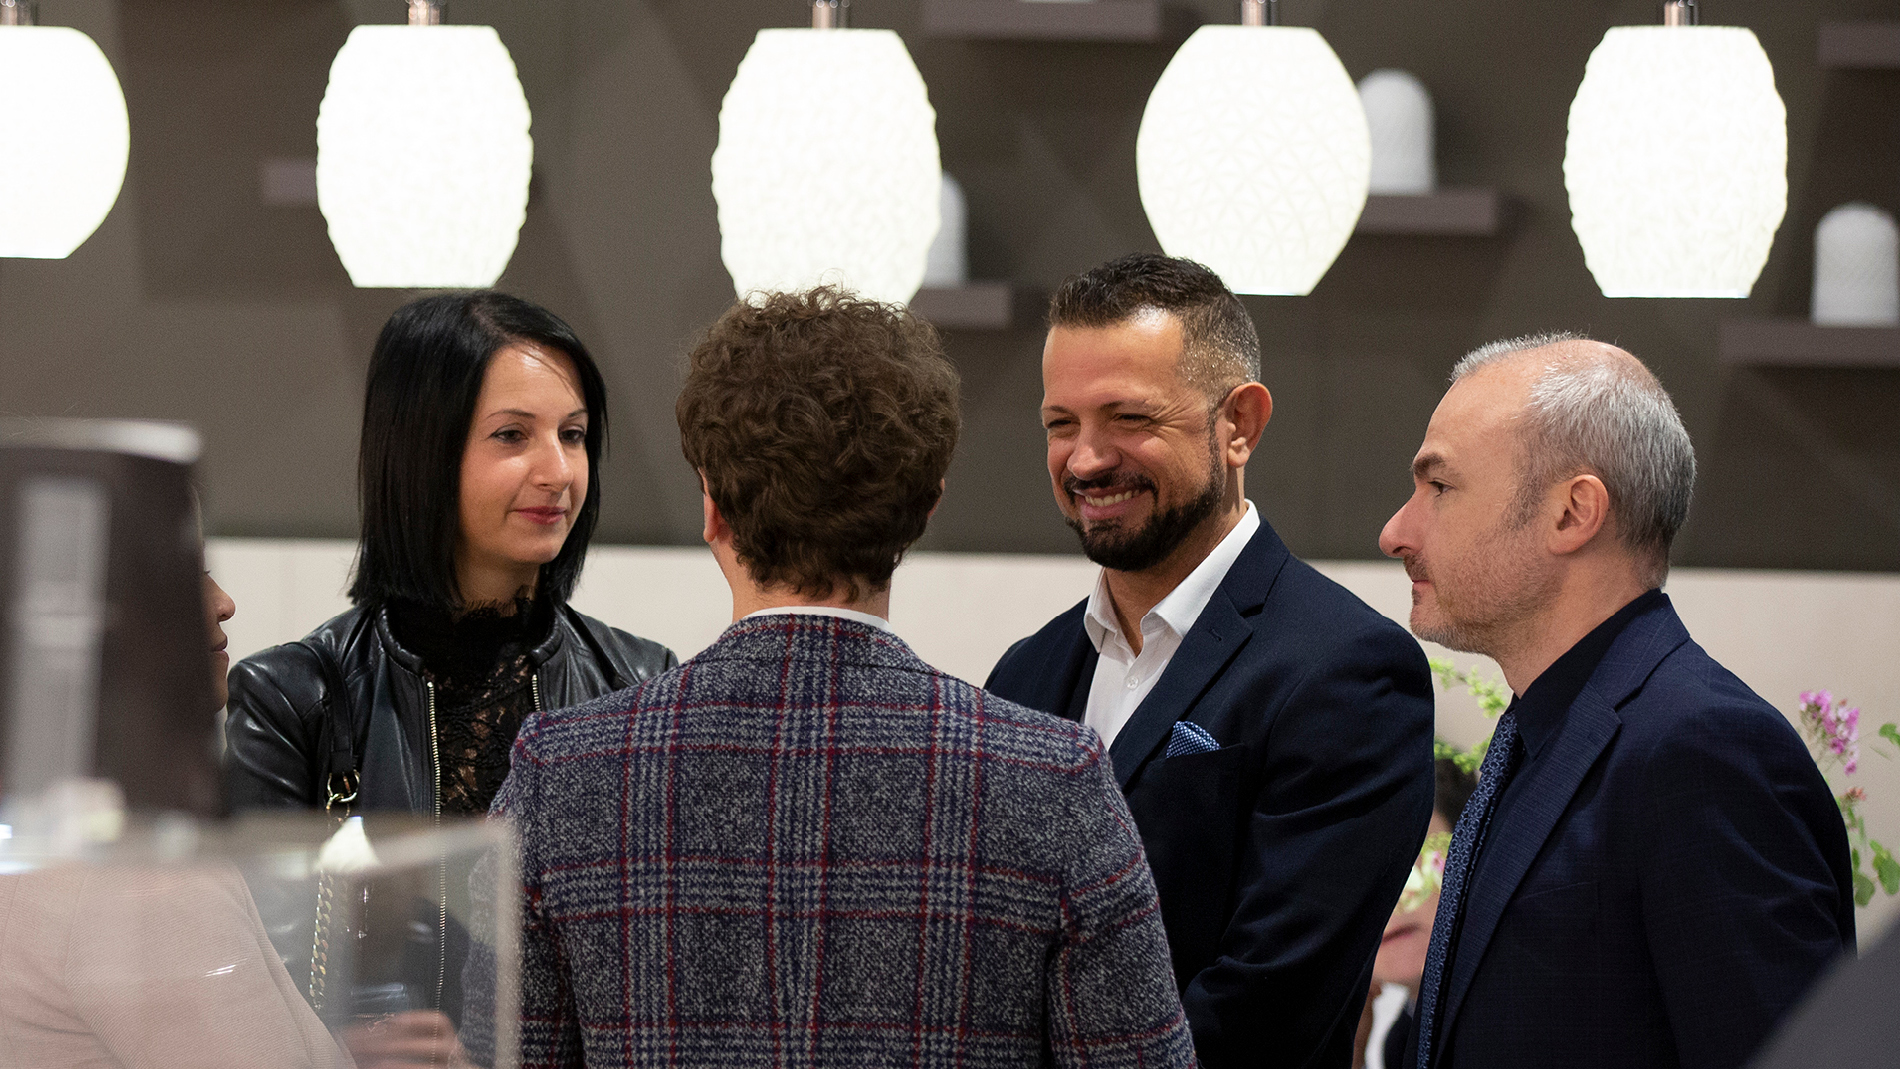 People in conversation at Ambiente